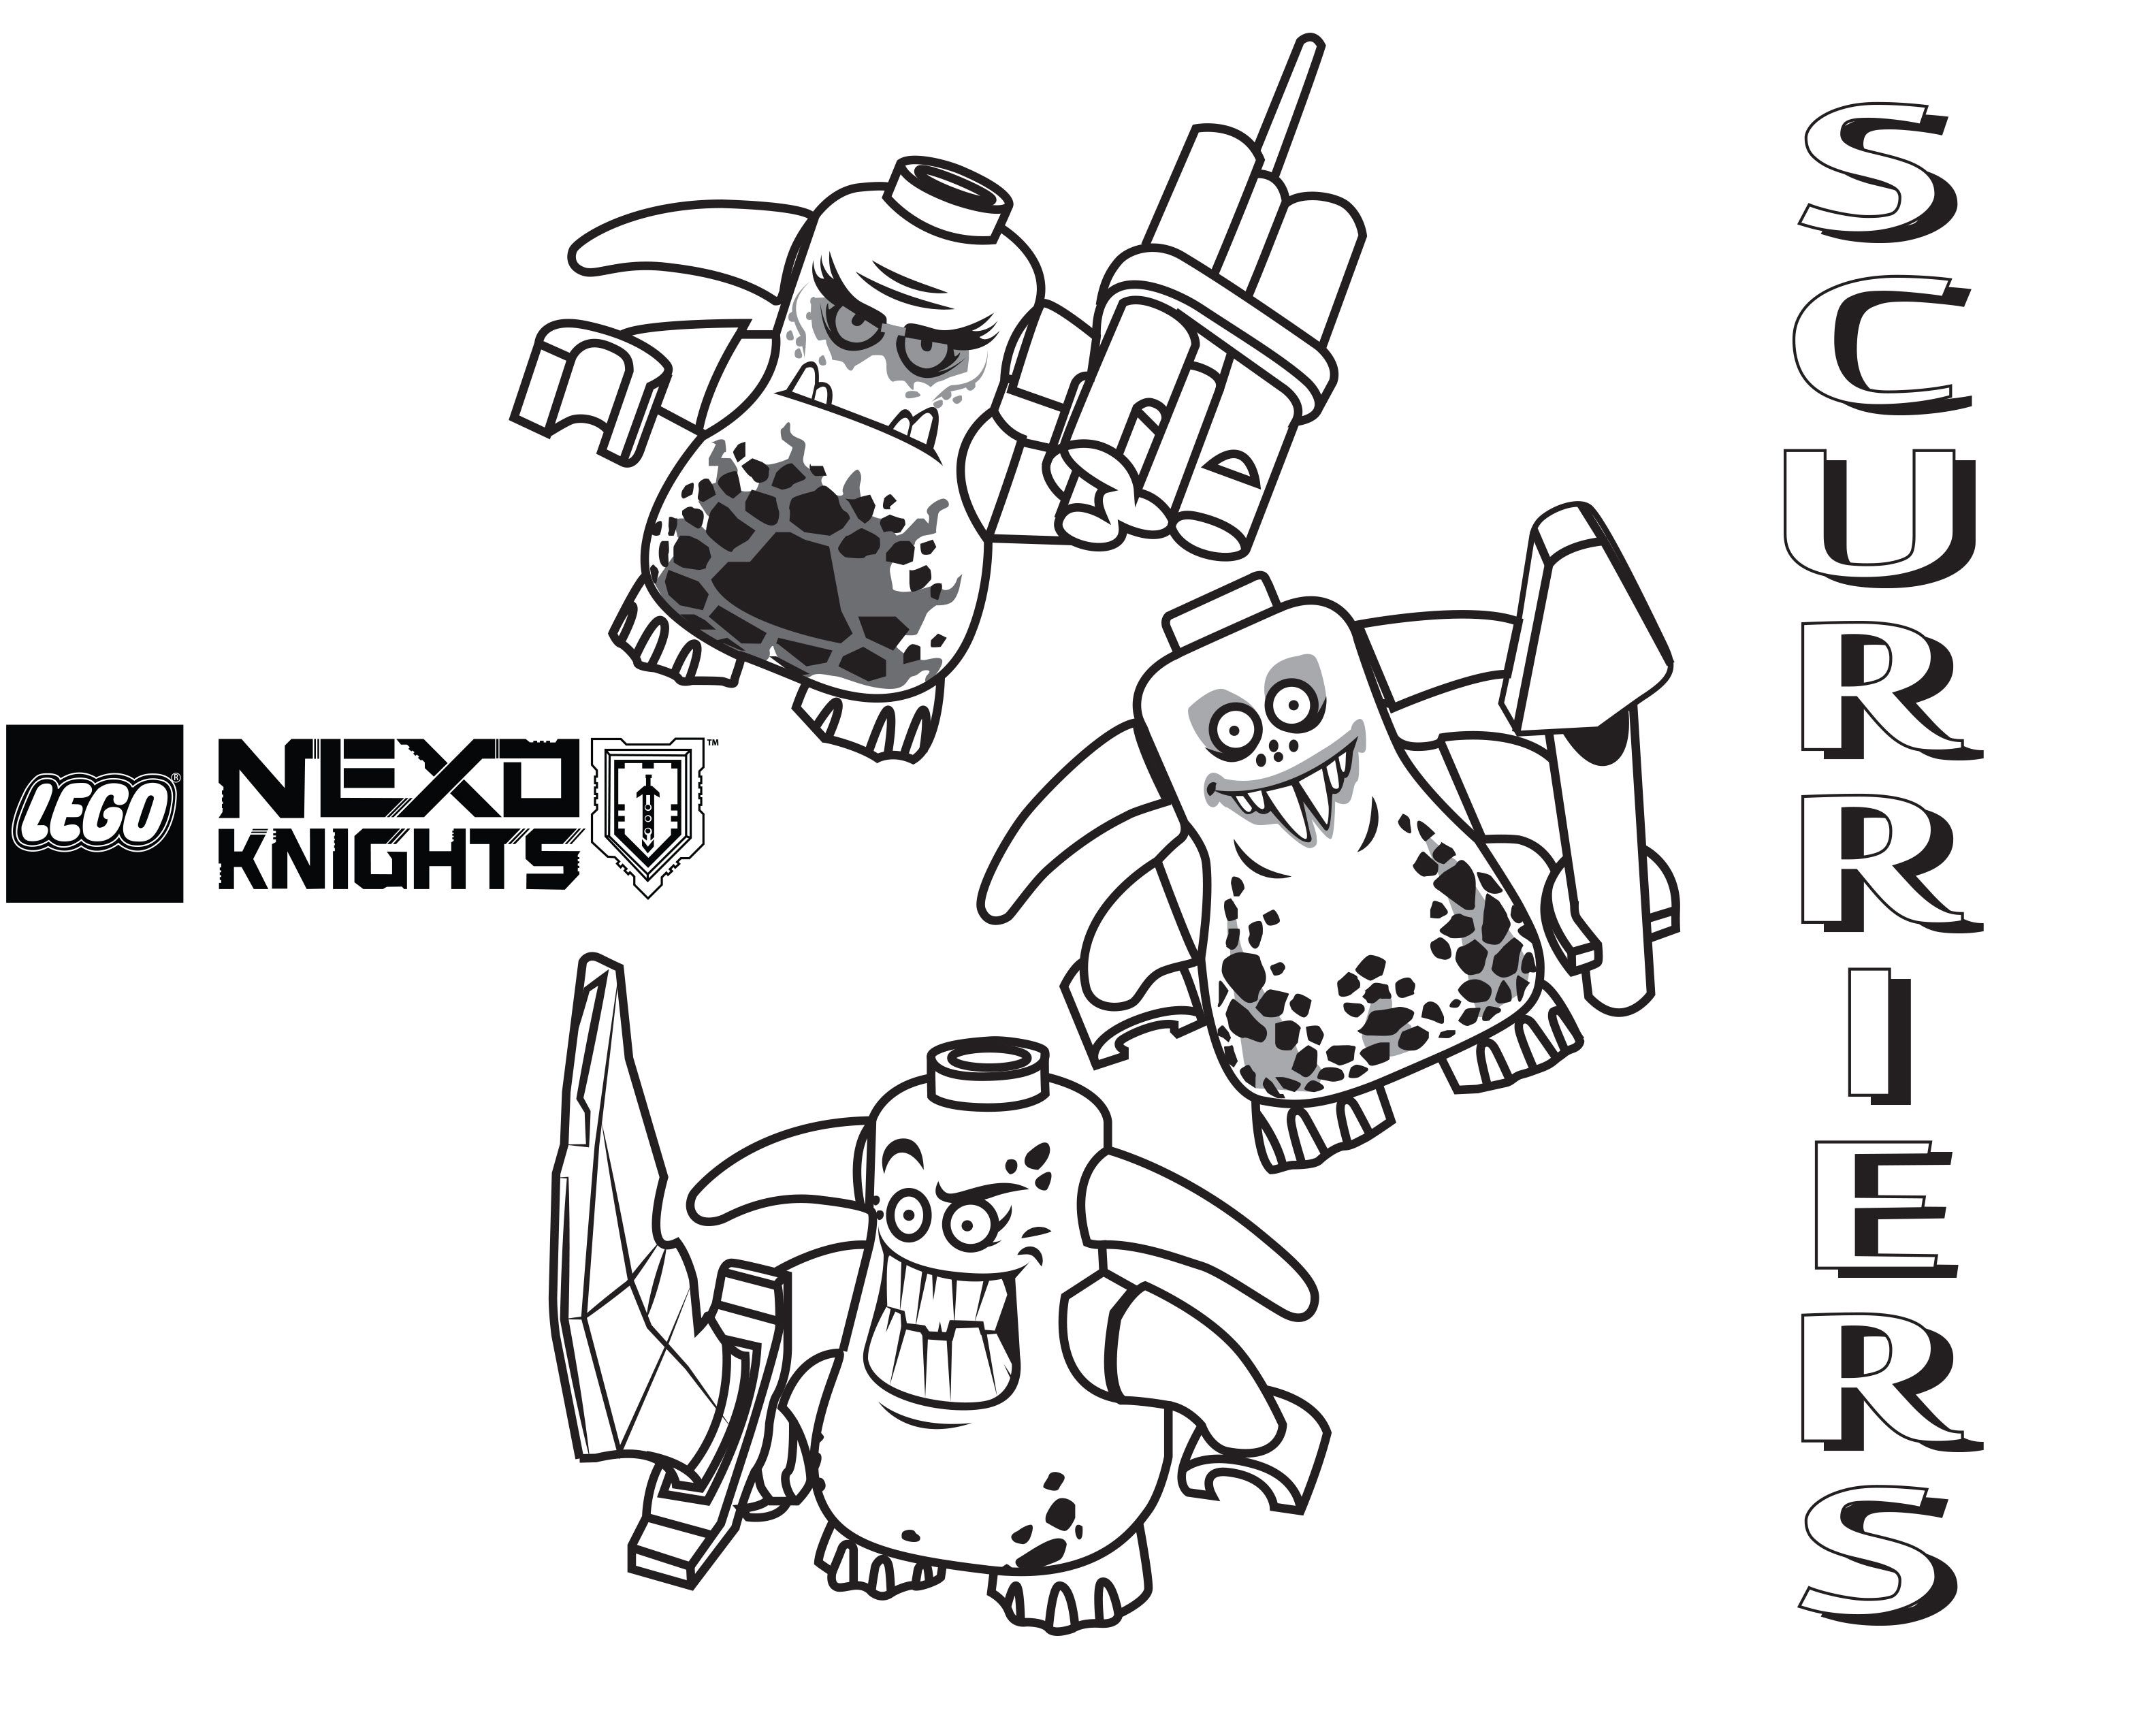 Lego Nexo Knights Pages - Home